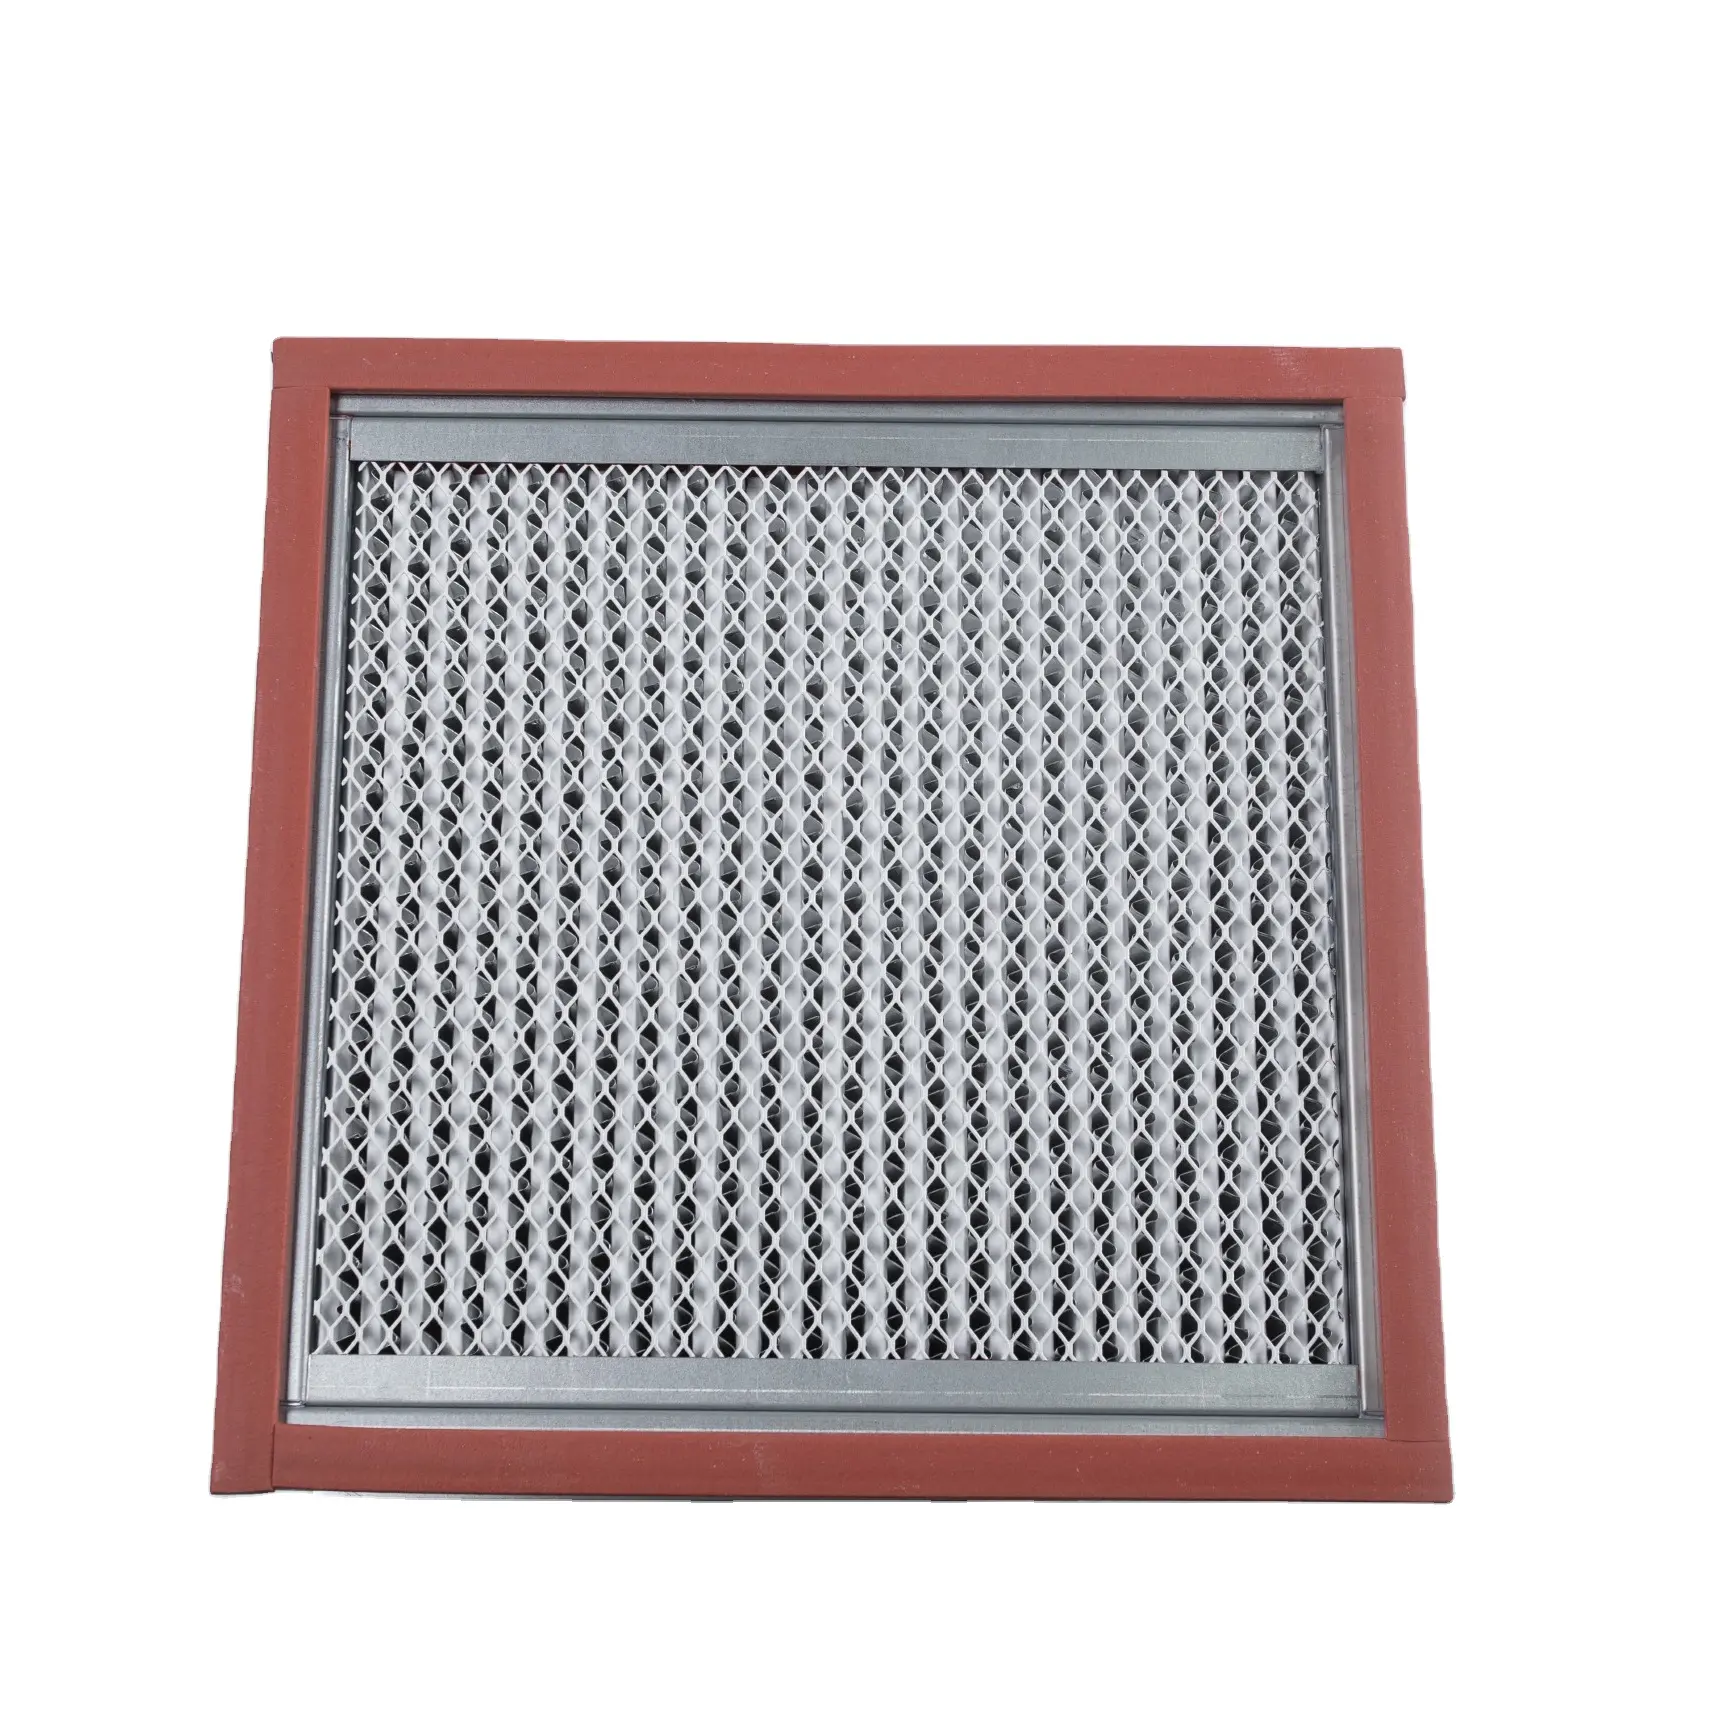 Composite Filter Hepa And Carbon Filter For Sammsung CFX-G100/SC Air PurIfier Filter Parts